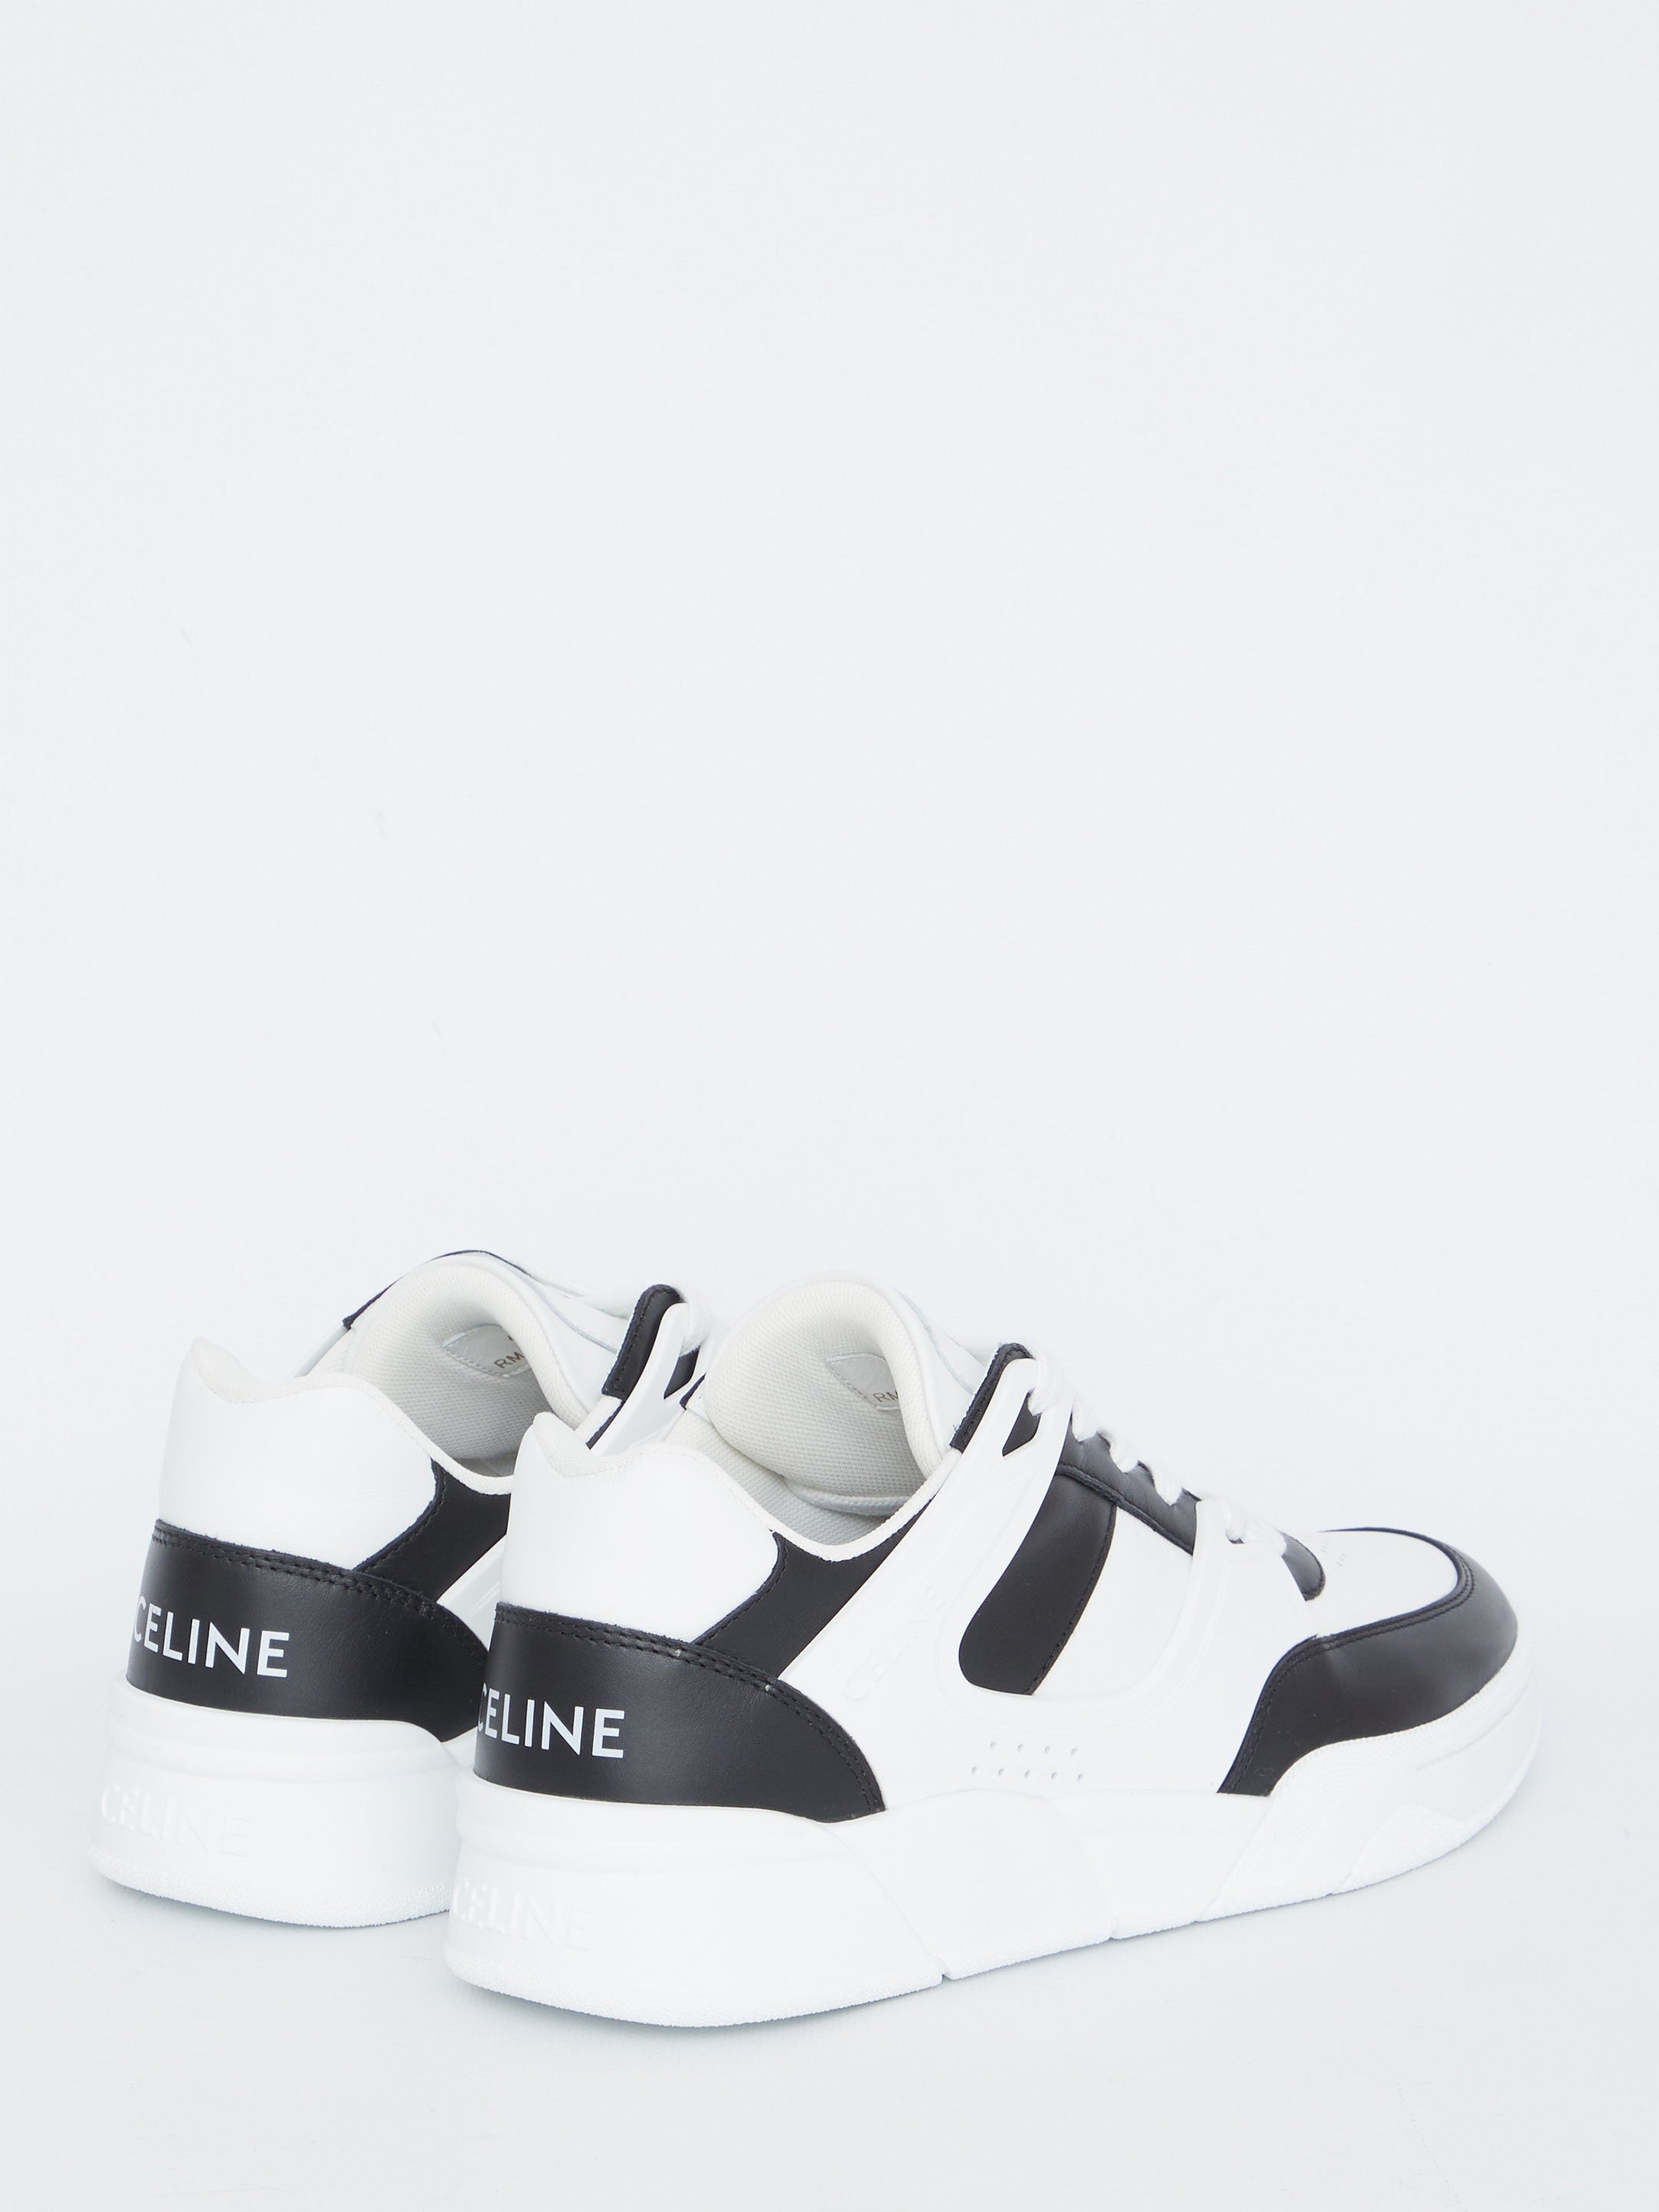 CELINE-OUTLET-SALE-CT-07-sneakers-Sneakers-ARCHIVE-COLLECTION-3.jpg